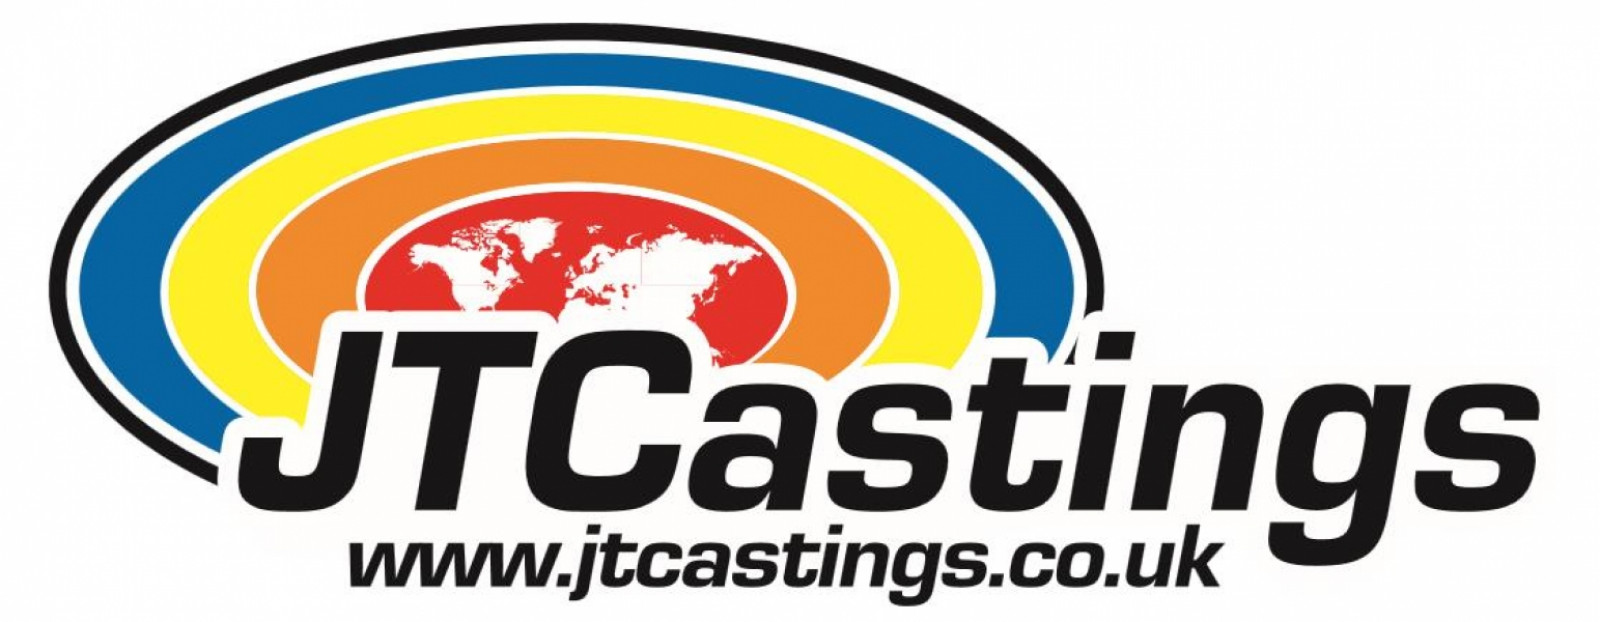 J T CASTINGS LAUNCHES NEW LOGO